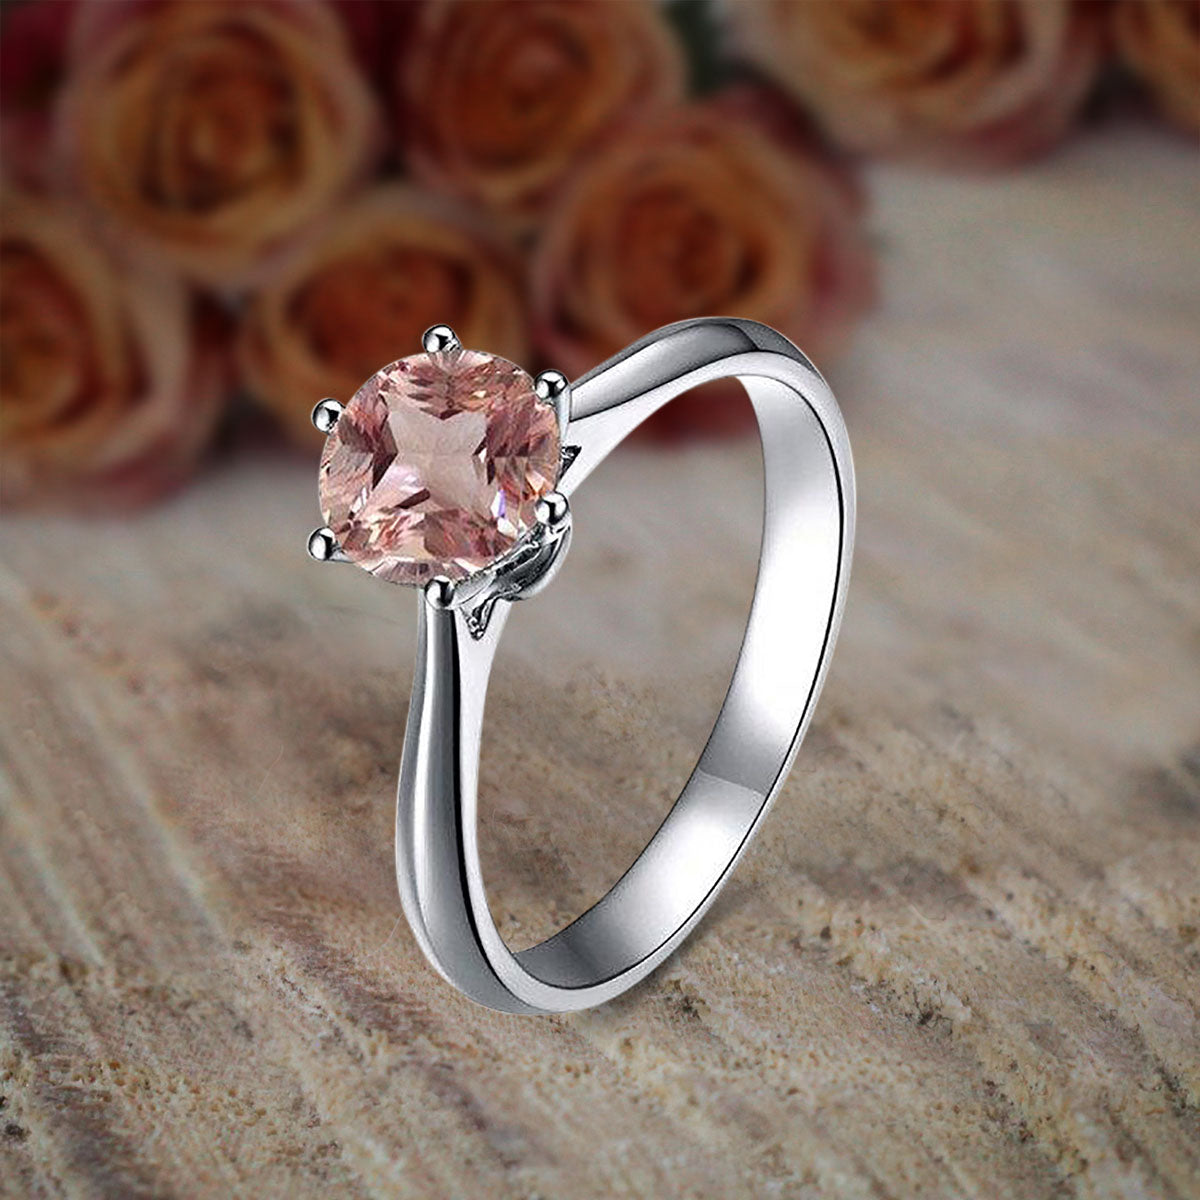 Simple Rose Gold Engagement Ring & Wedding Band Set… | Solitaire engagement  ring rose gold, Engagement rings wedding bands set, Beautiful rose gold  engagement rings